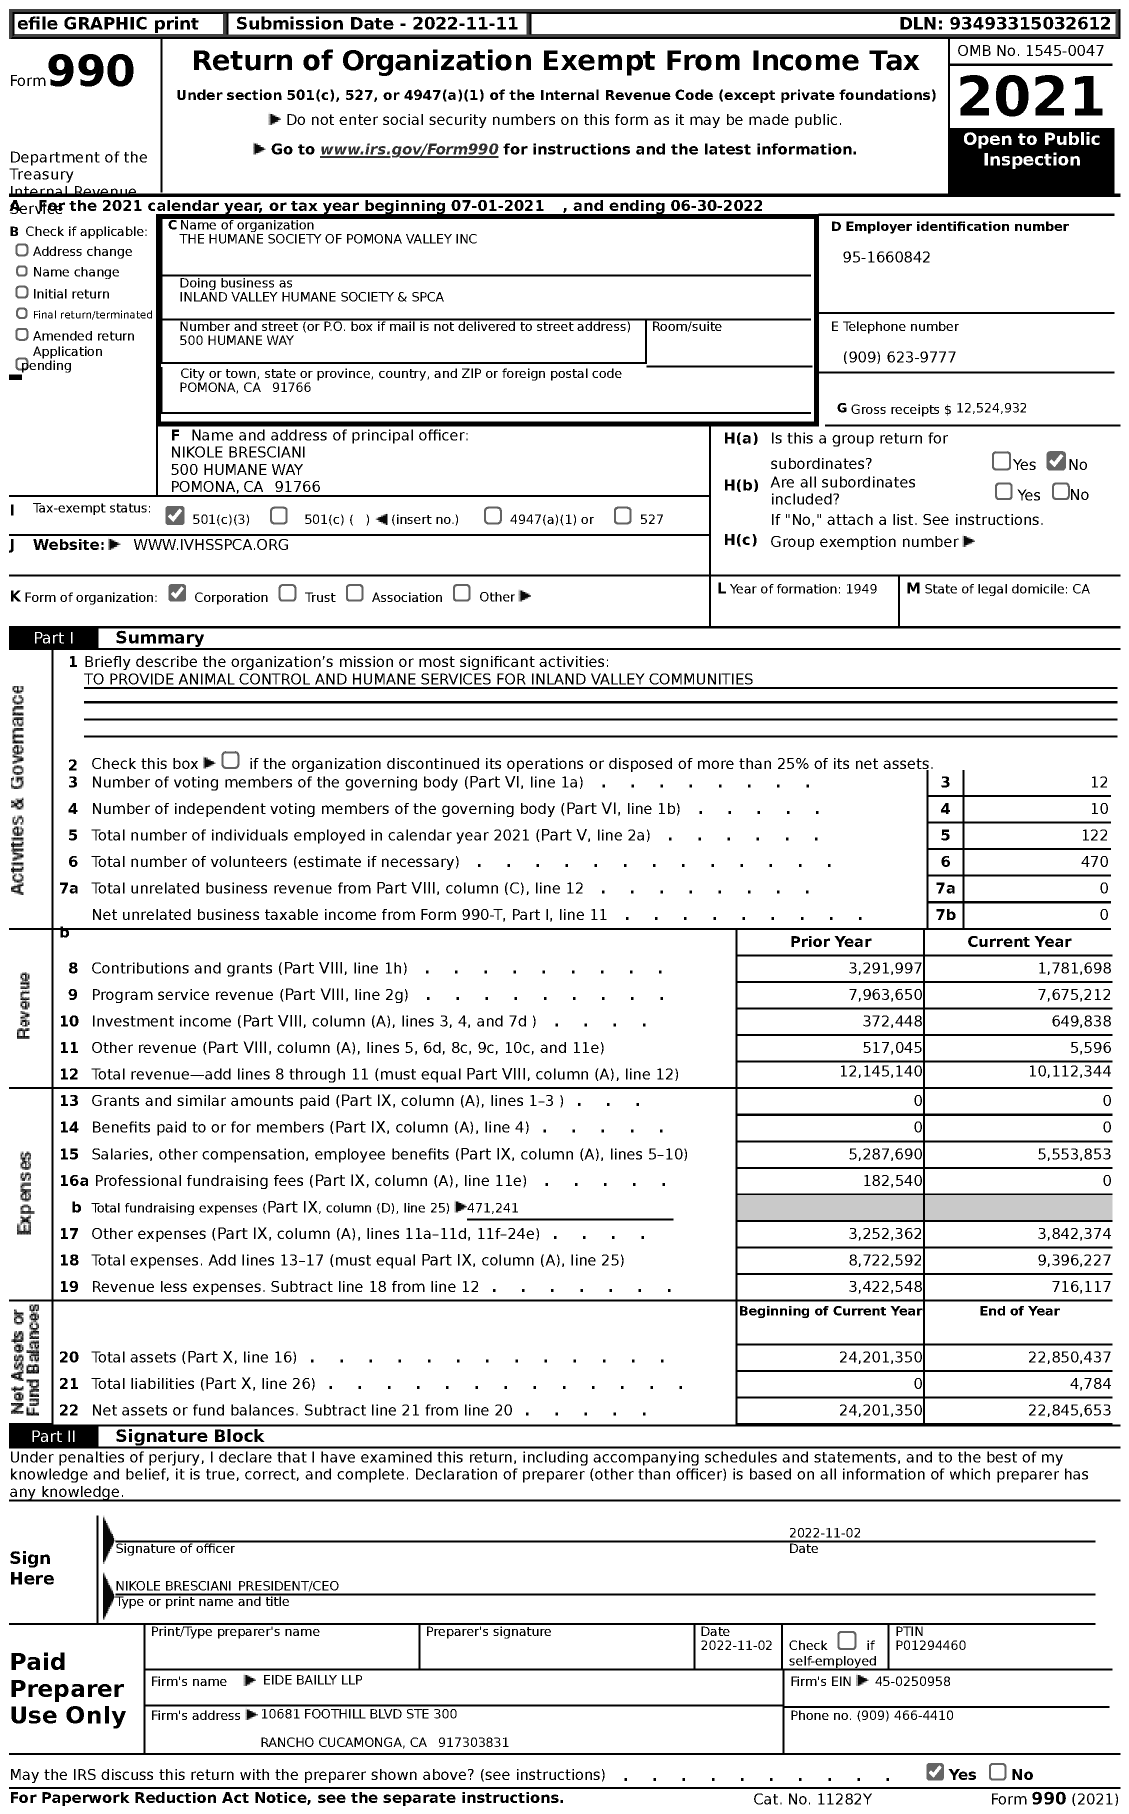 Image of first page of 2021 Form 990 for Inland Valley Humane Society and Spca